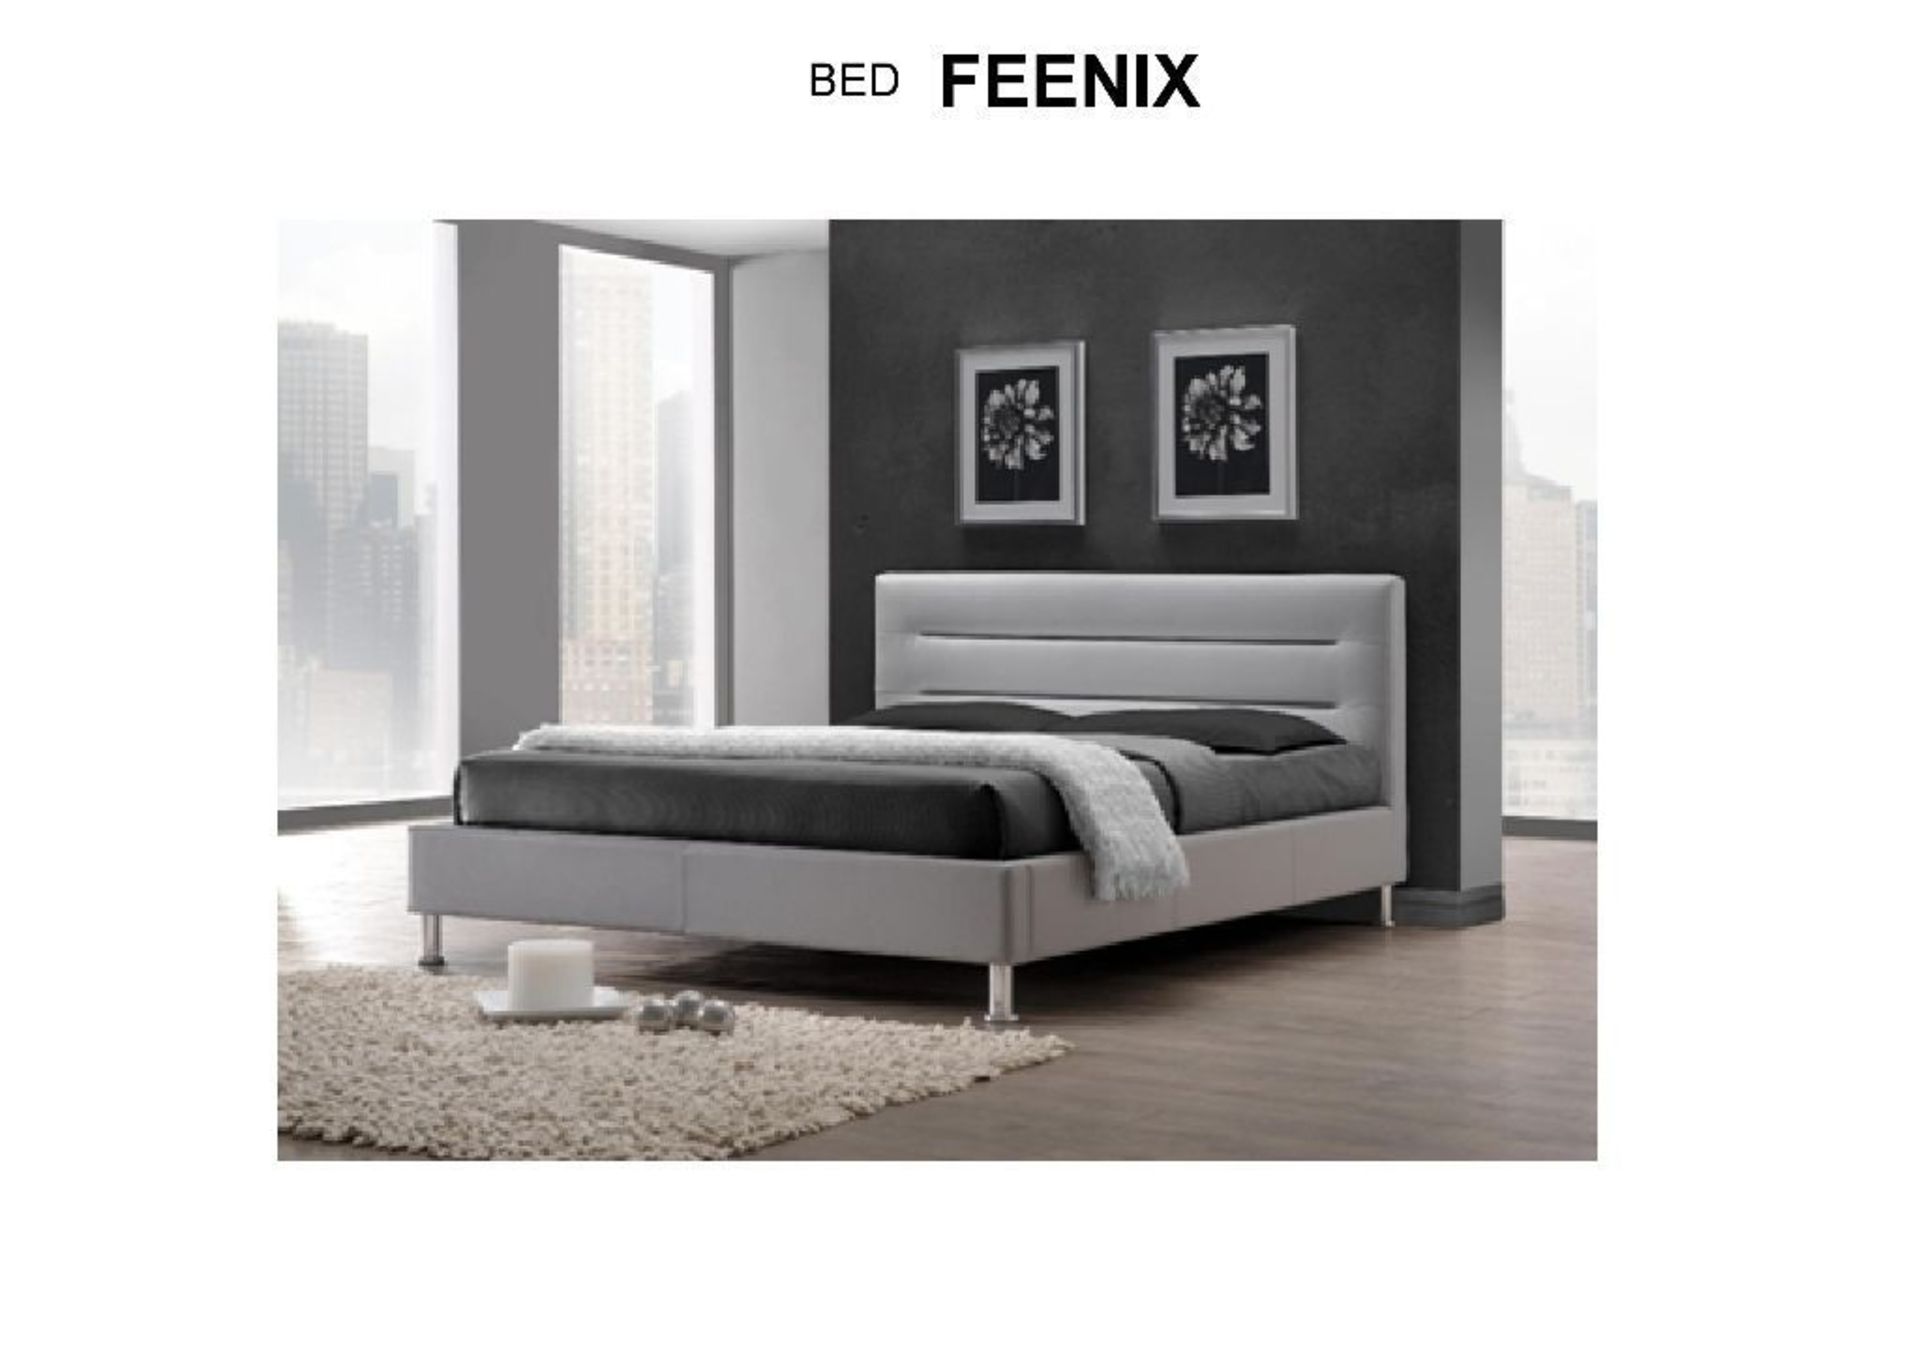 Brand new boxed direct from the manufacturers double feenix put bedstead in Ivory